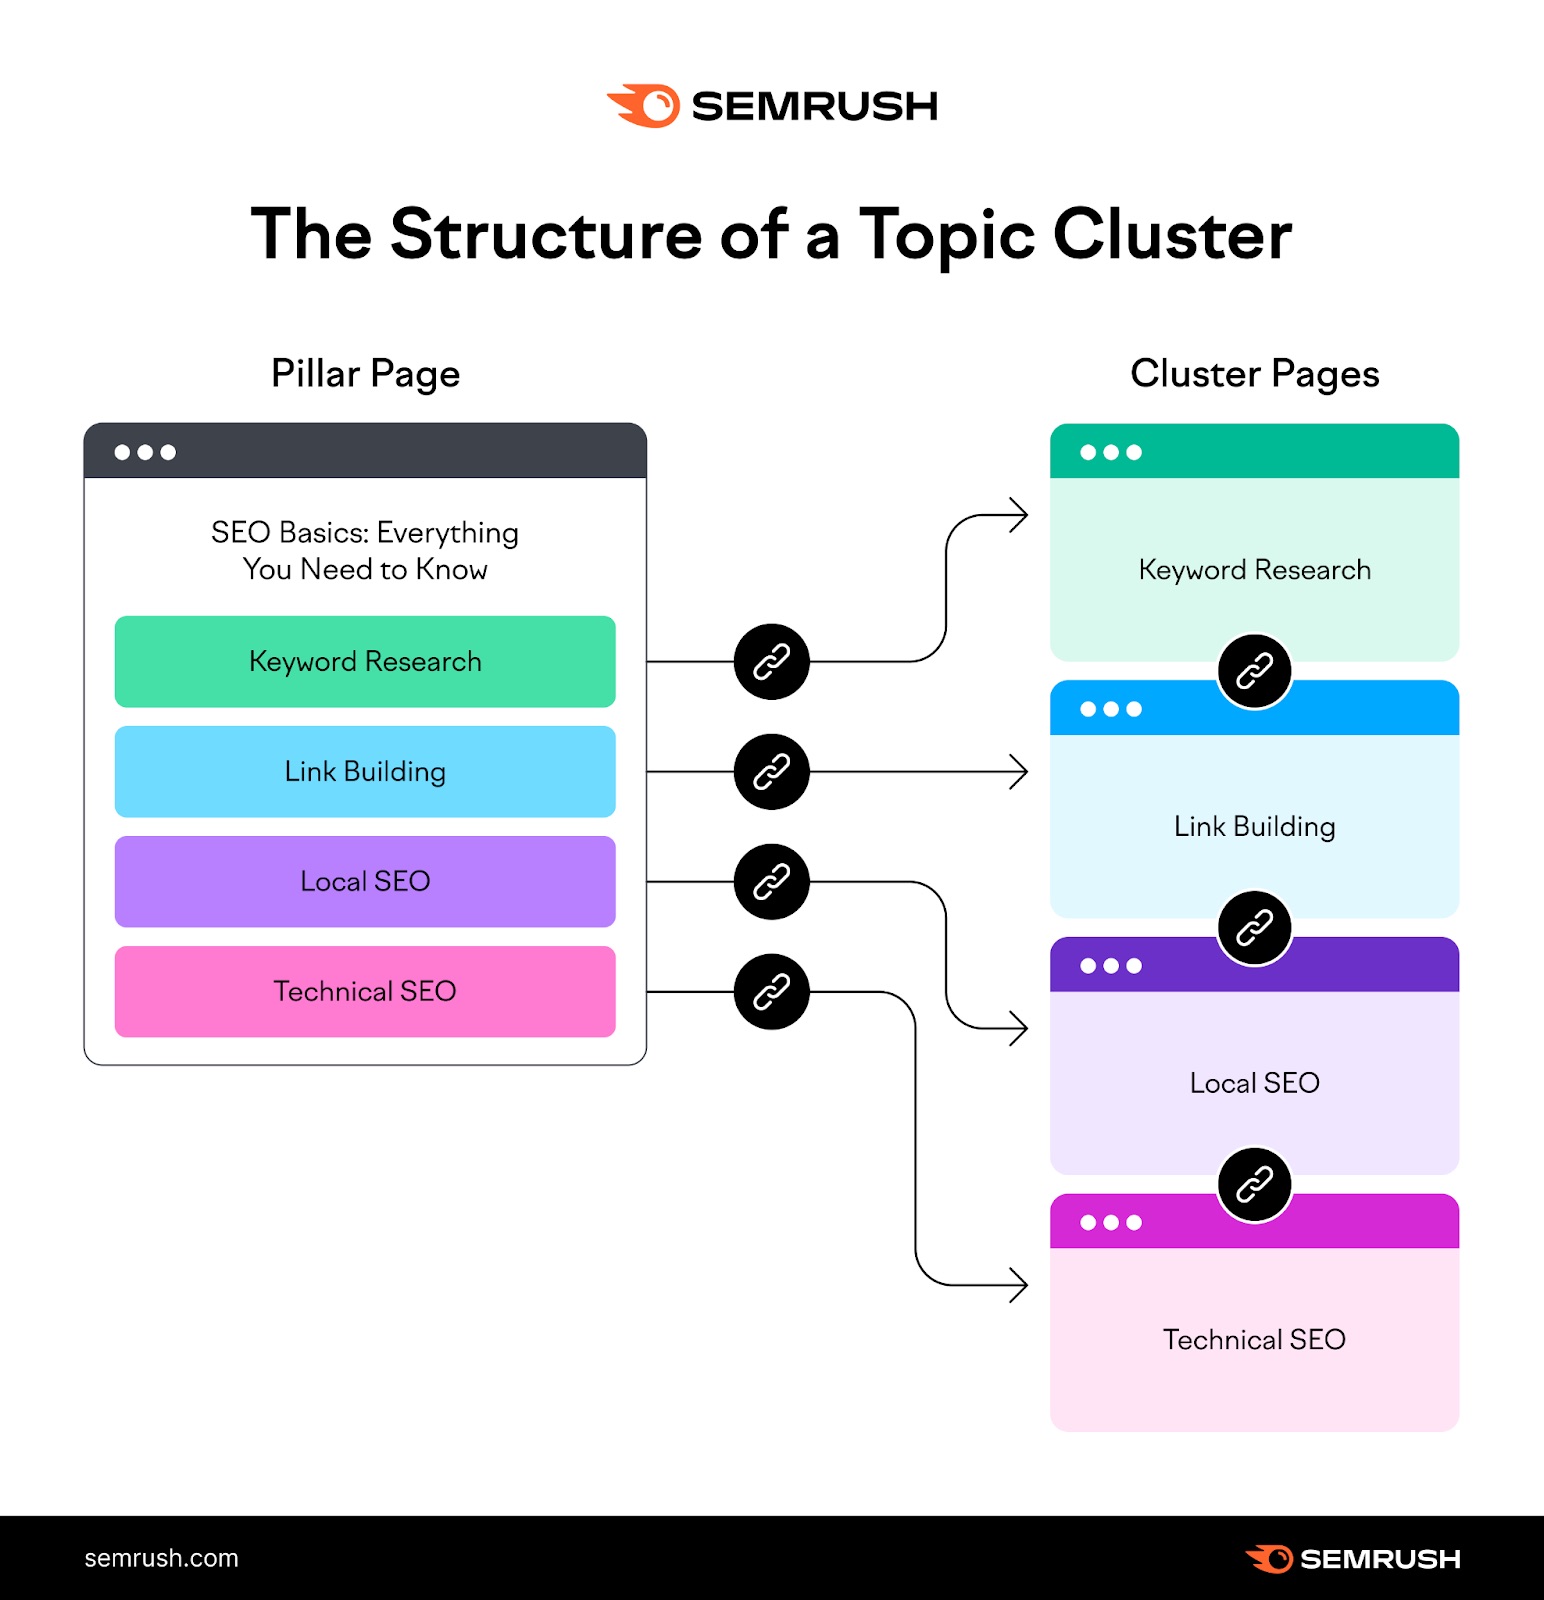 The structure of a topic cluster